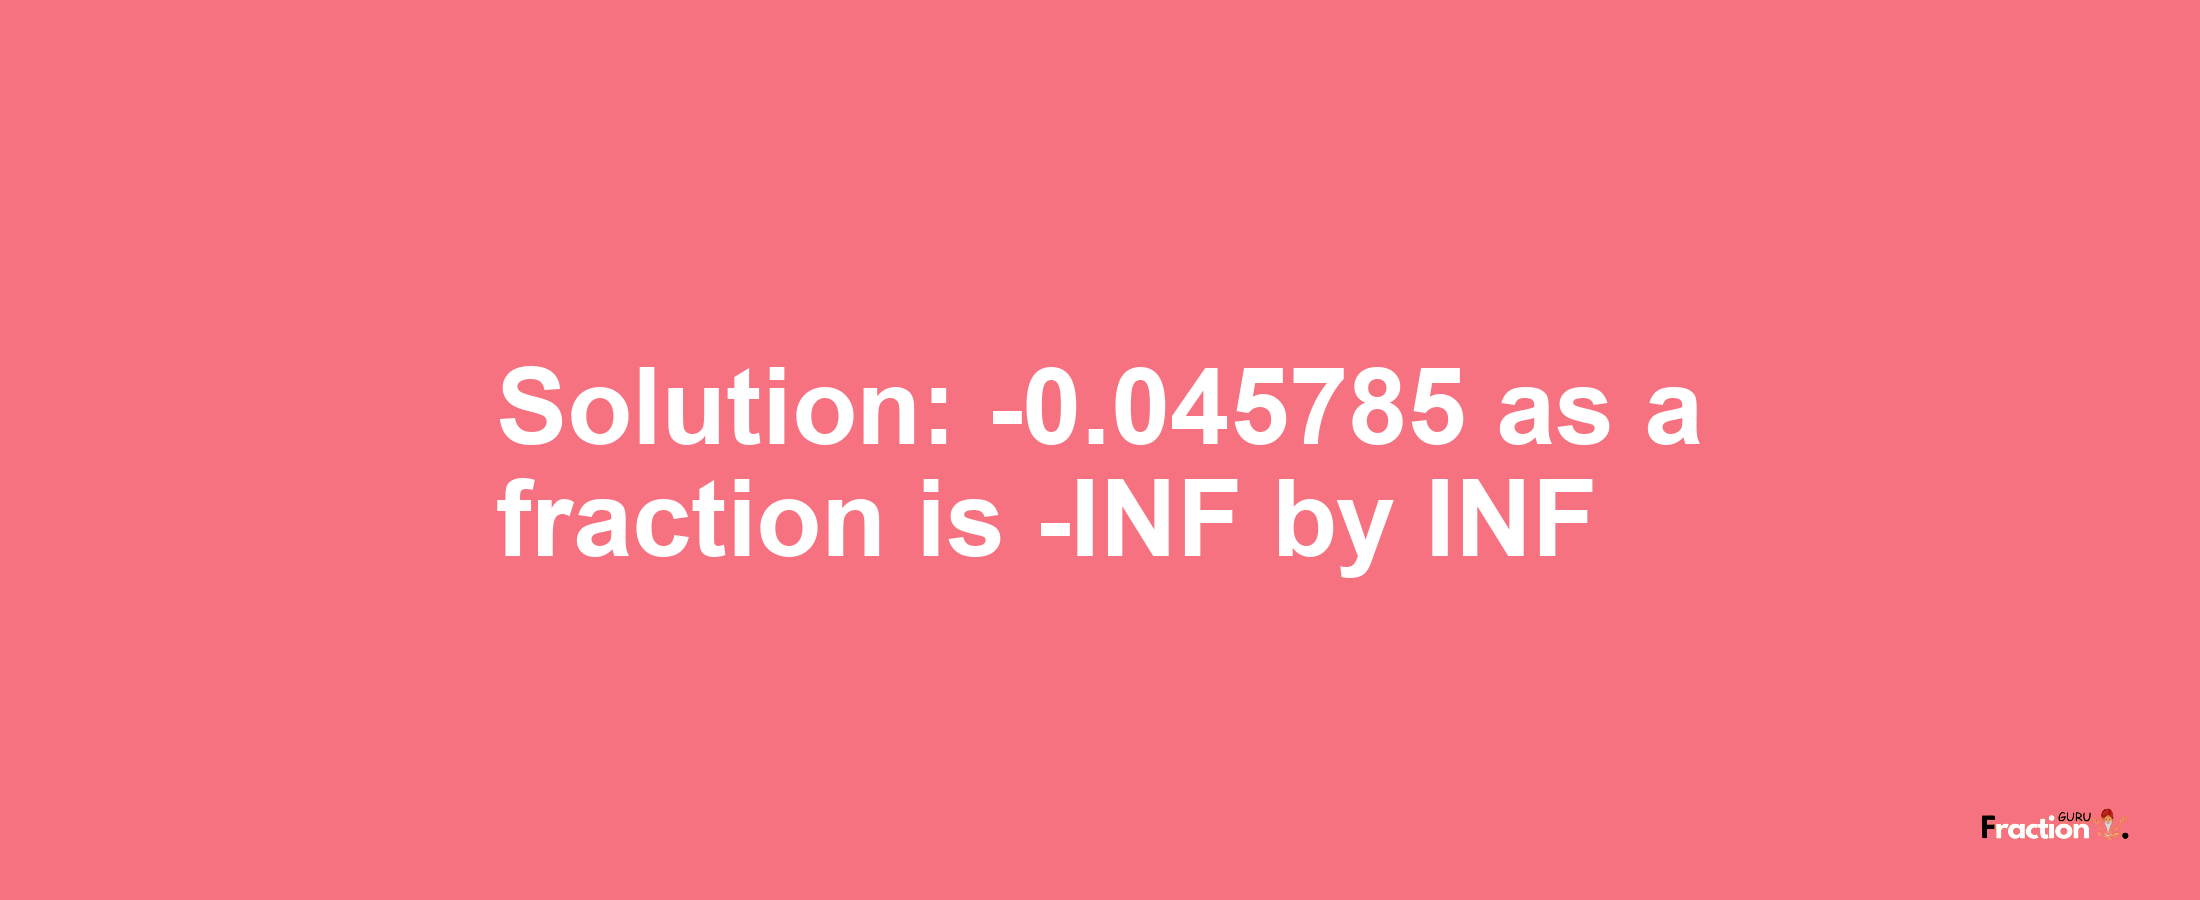 Solution:-0.045785 as a fraction is -INF/INF